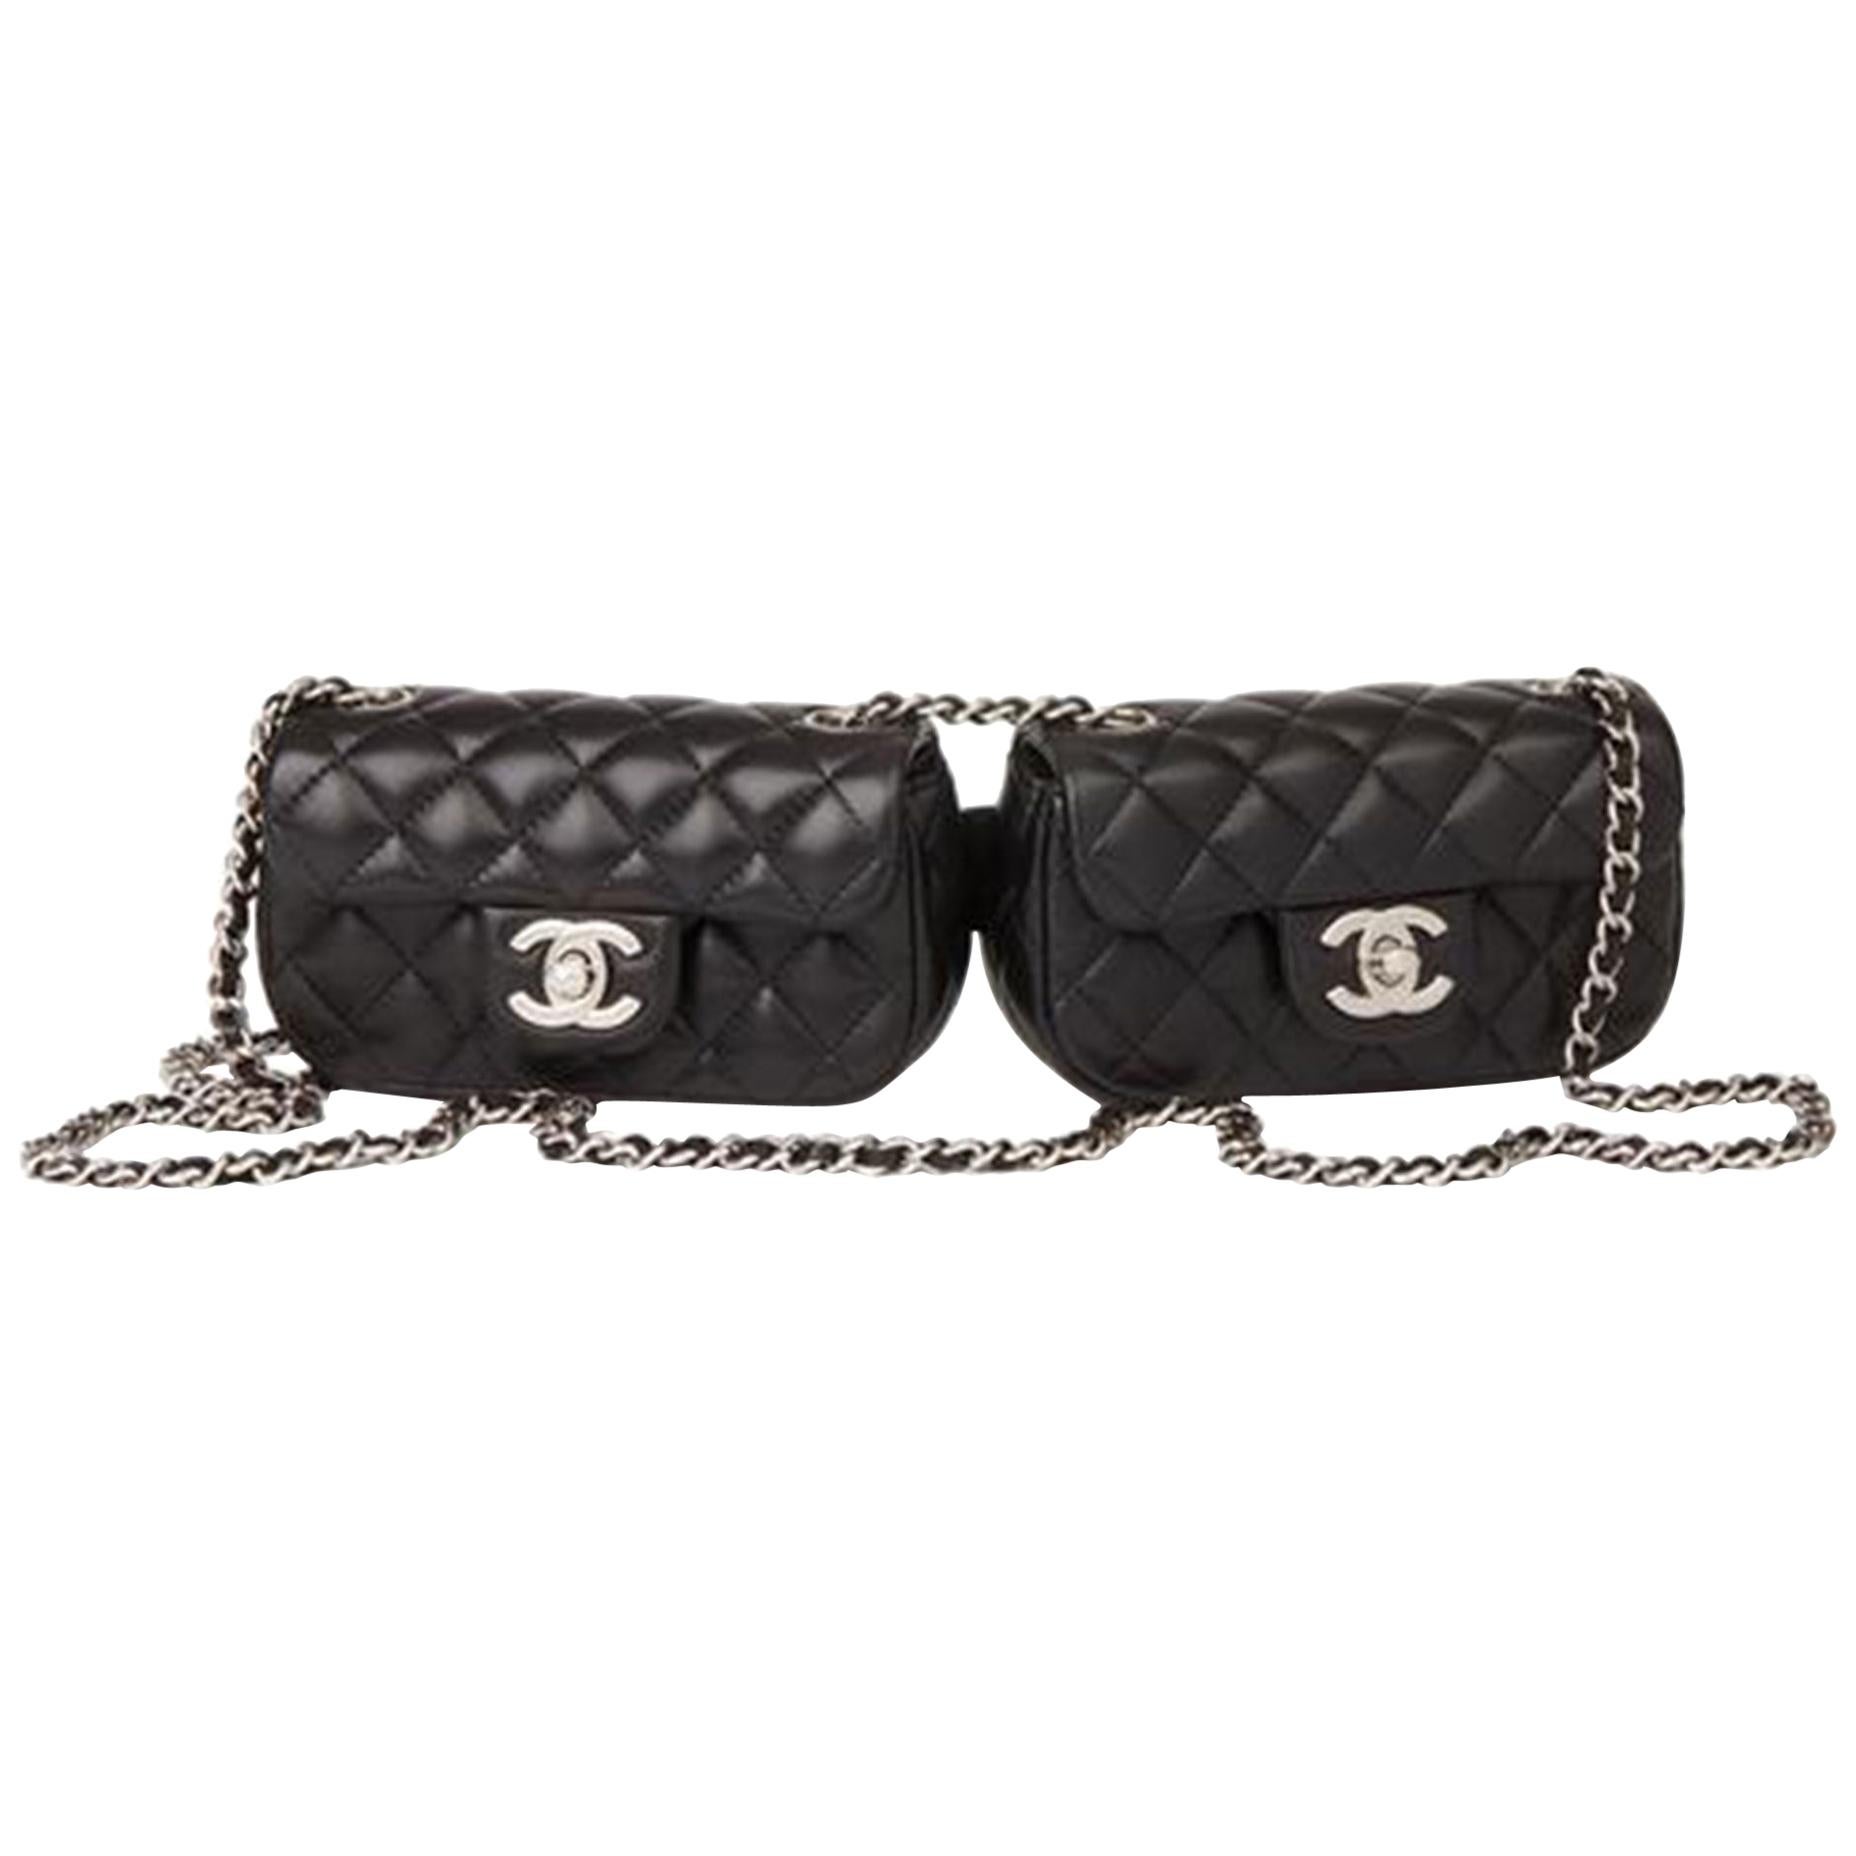 Chanel Side Pack Classic Flap 2.55 Reissue Rare Limited Edition Double Bag Set im Angebot